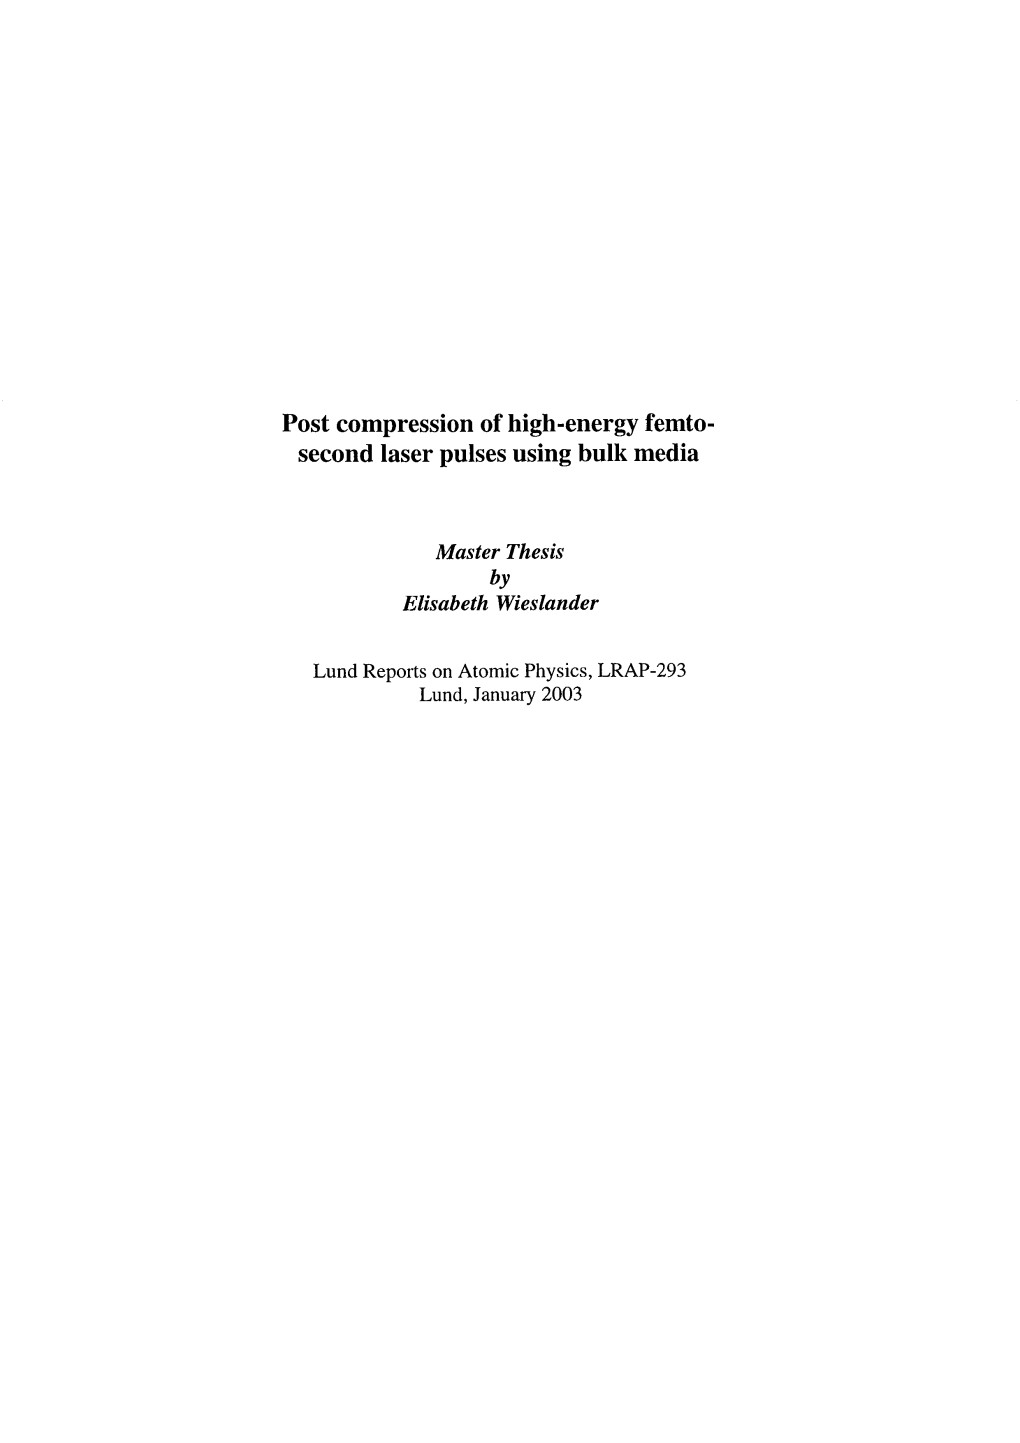 Post Compression of High-Energy Femto- Second Laser Pulses Using